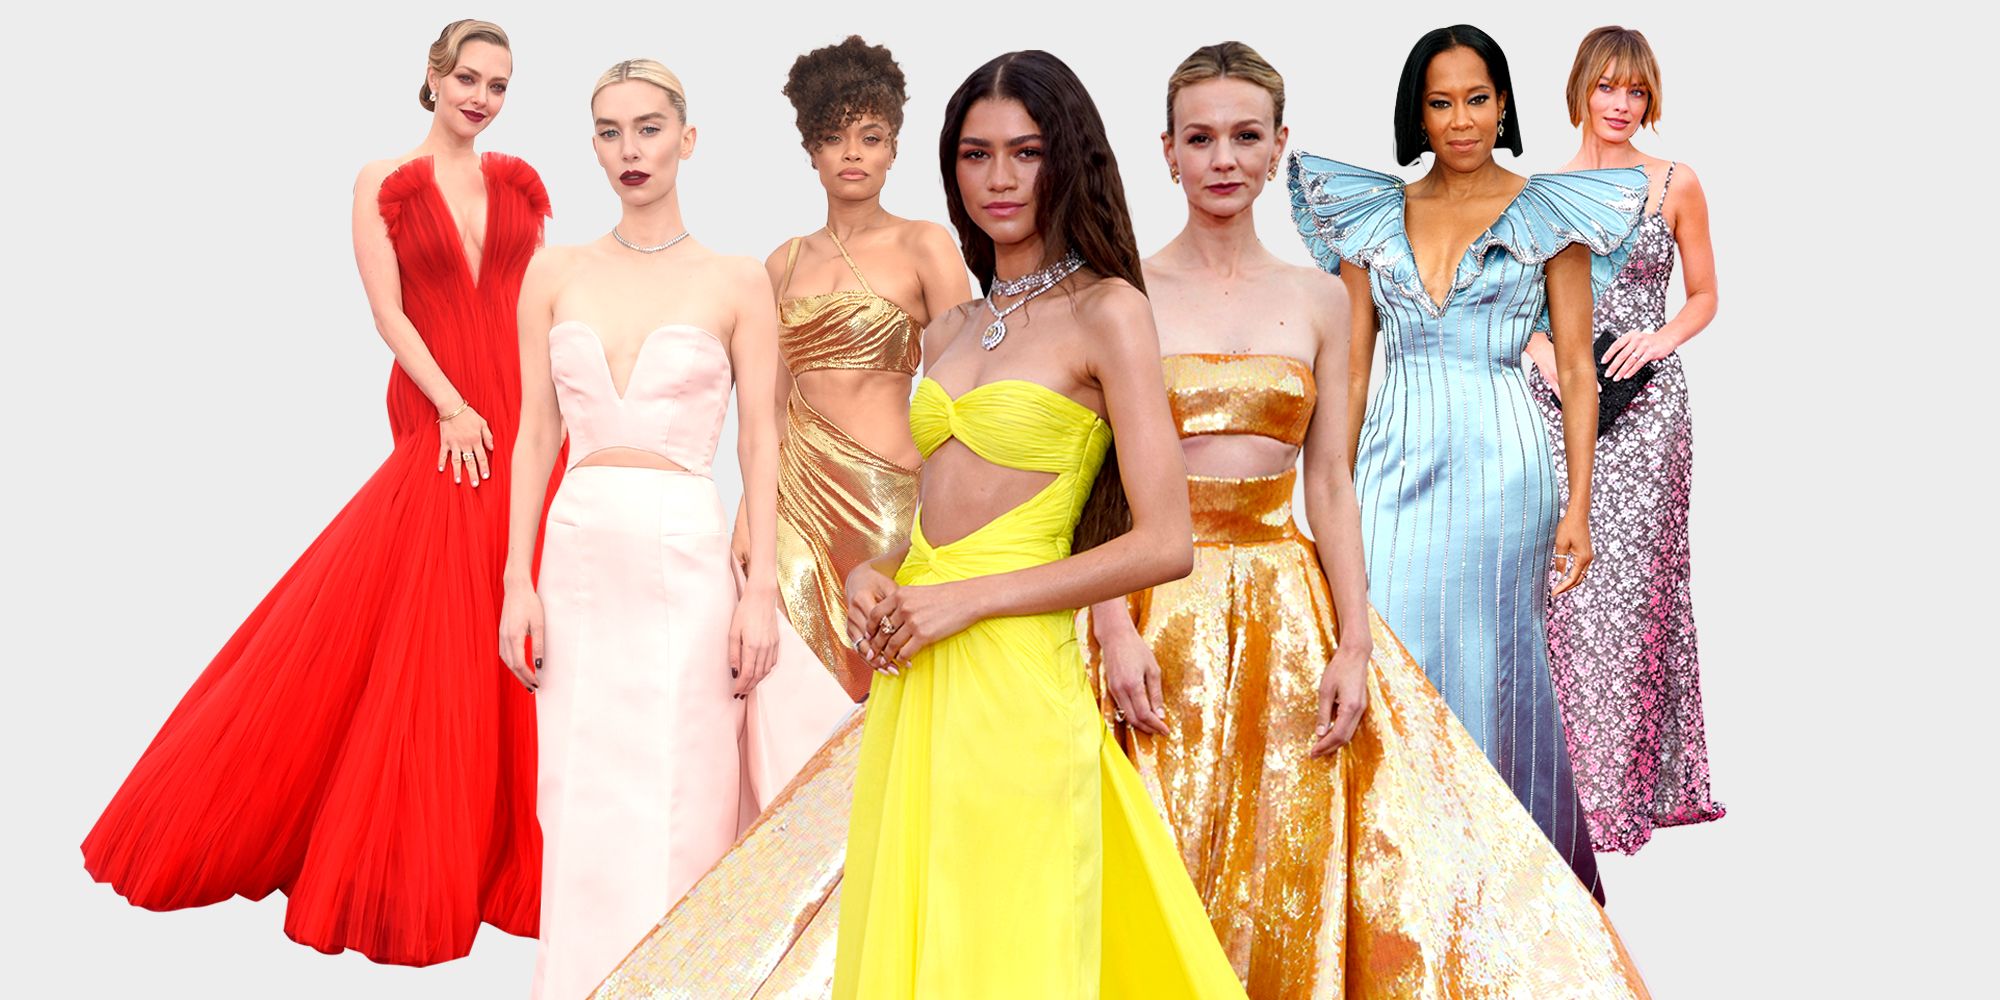 Top 10 Best Dressed at the 2021 Oscars: H.E.R Pays Homage to